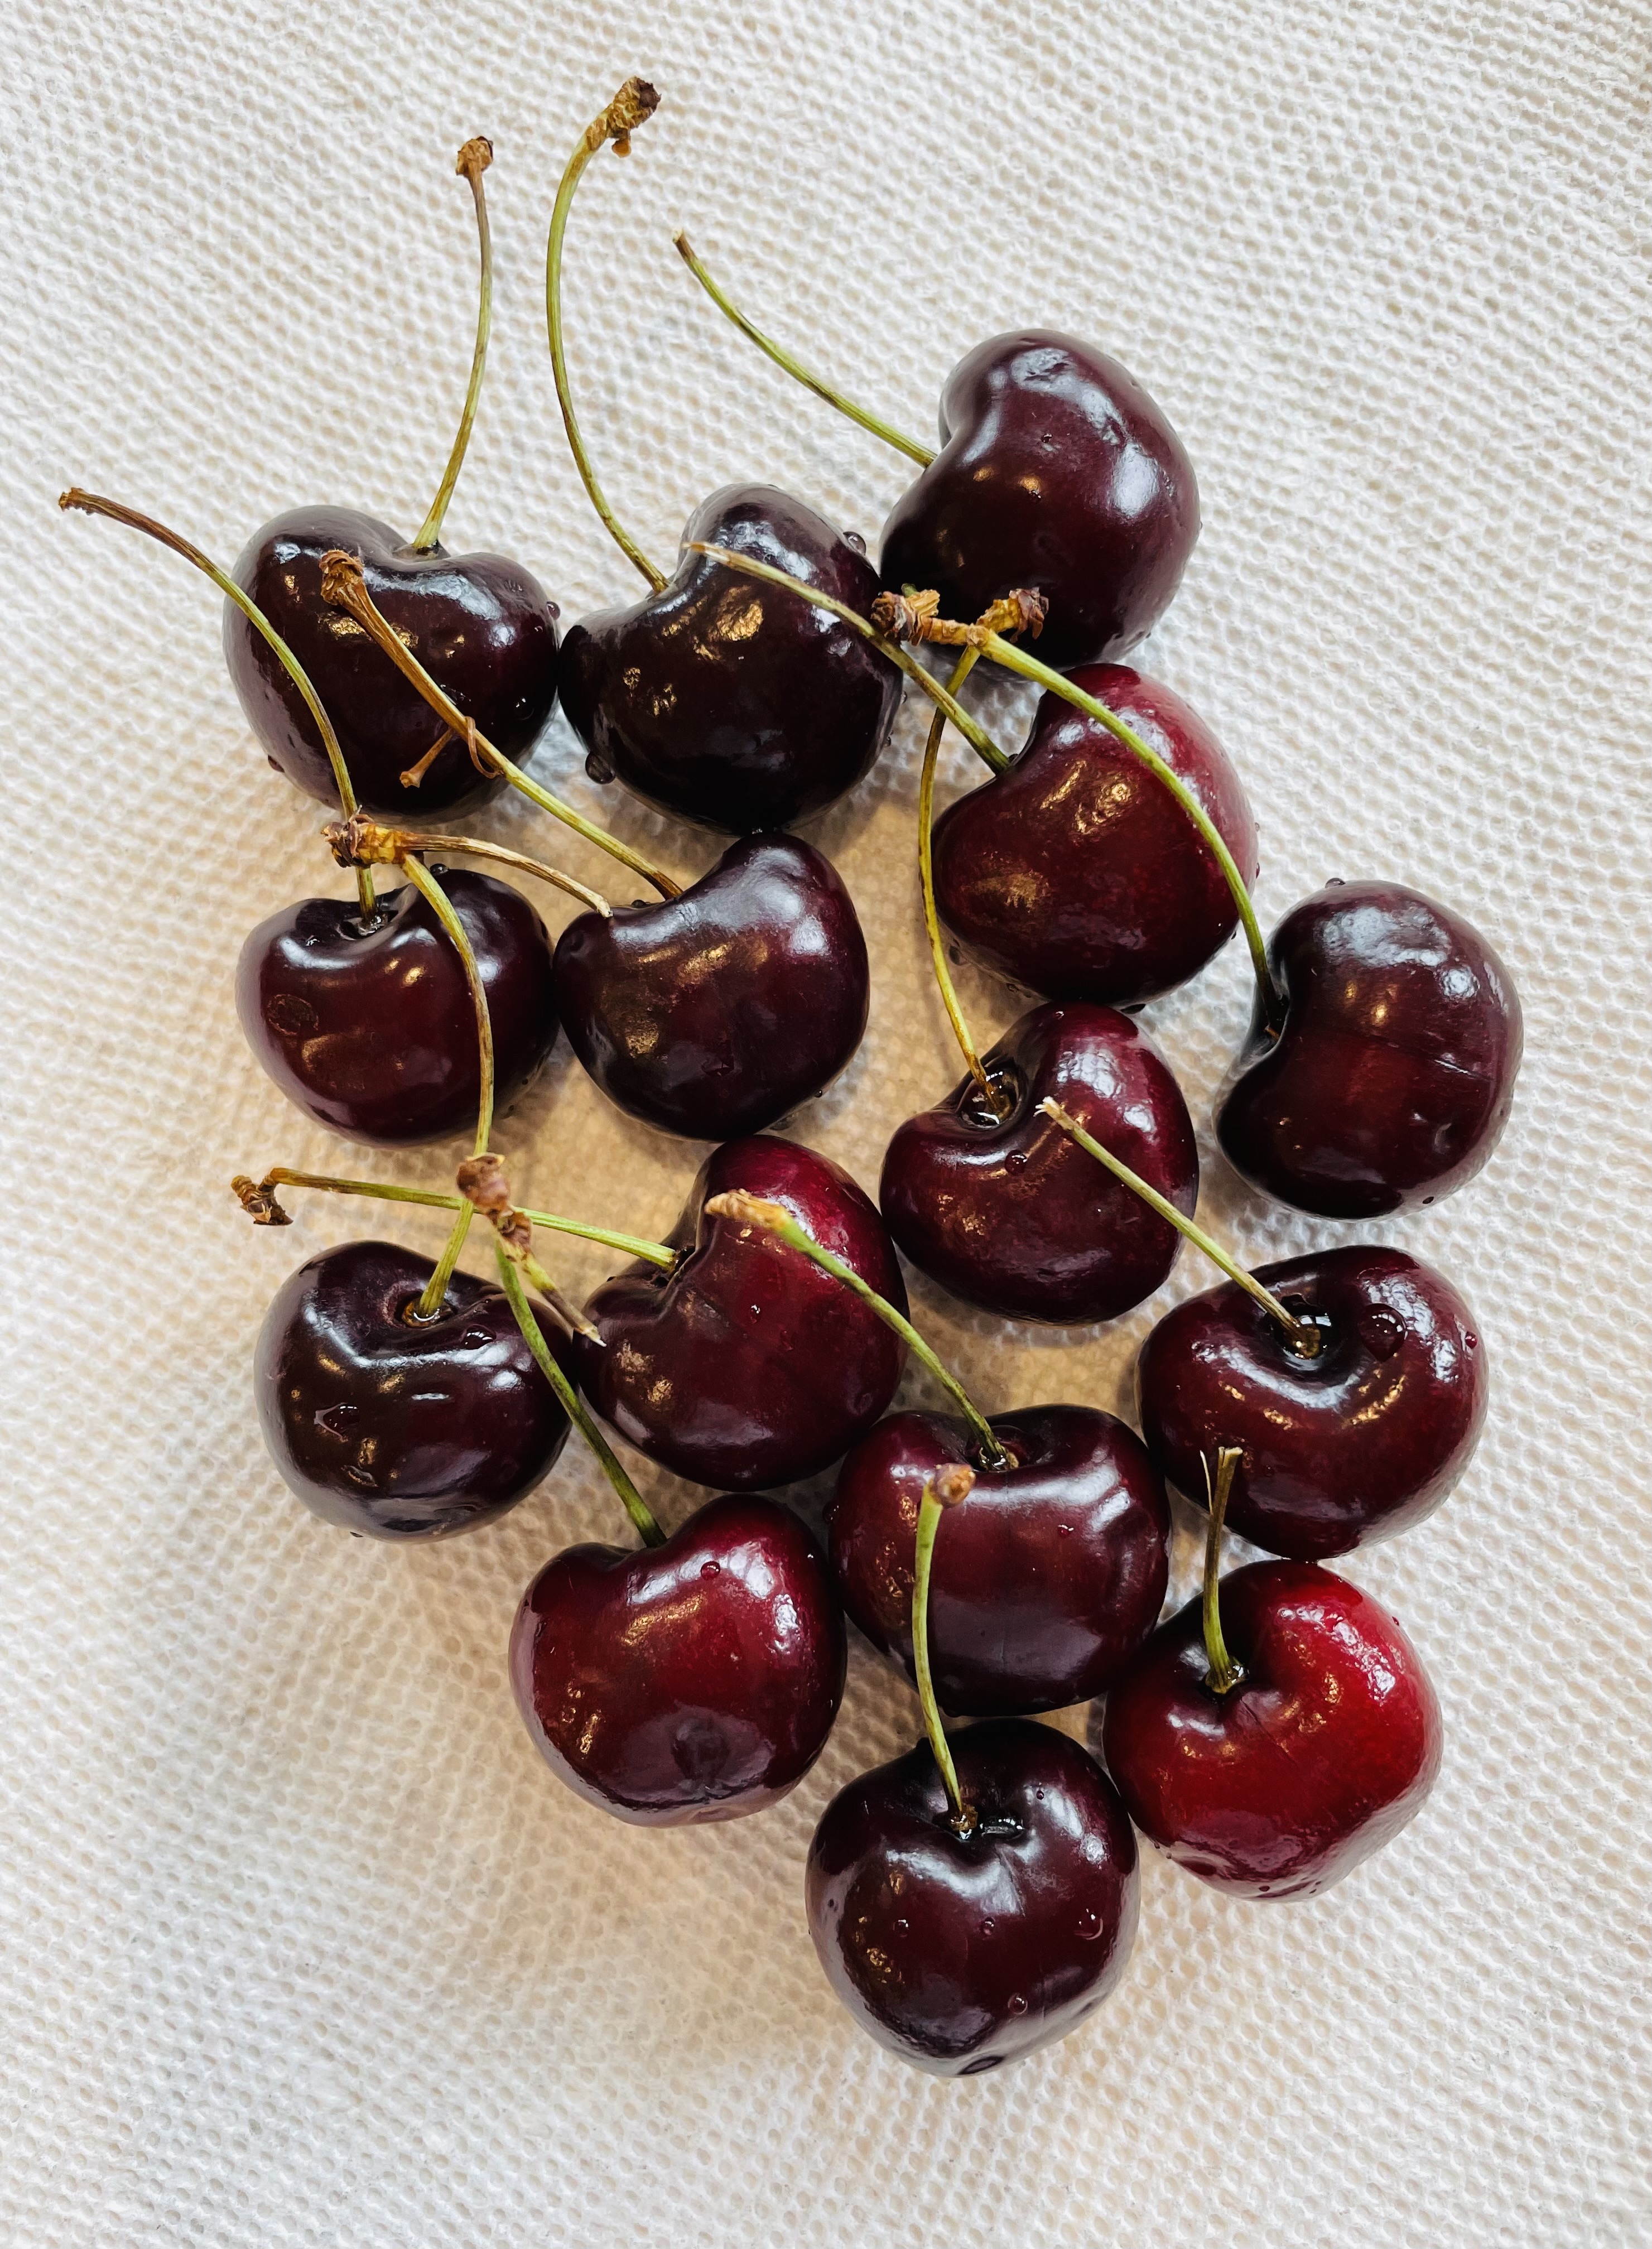 How to select the best cherries 